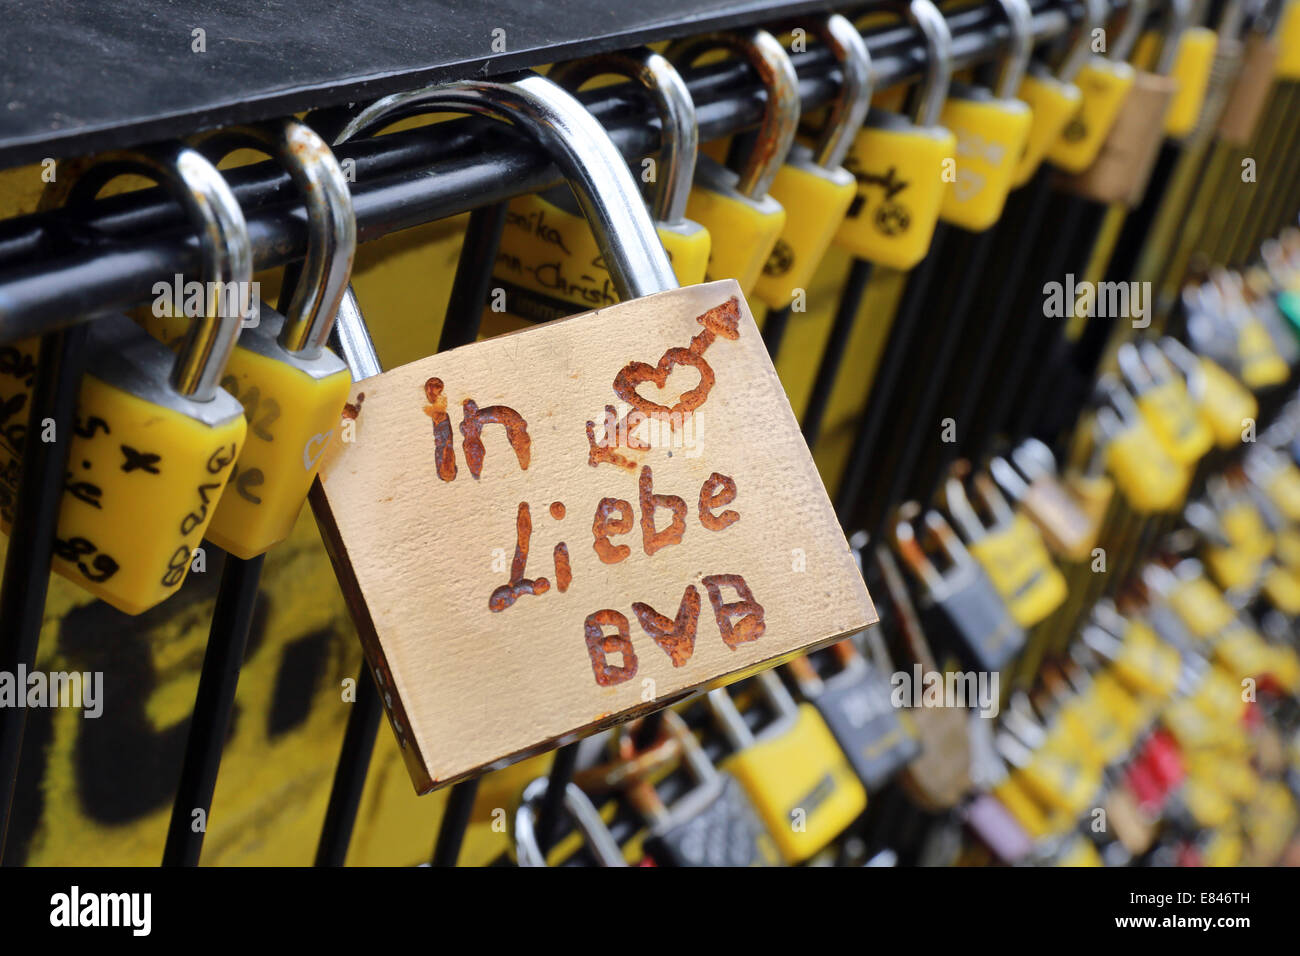 Germany, Dortmund, Signal Iduna Park soccer stadium: The so called 'Wall of Love' (writing says 'real love') bat the stadium, fans of the soccer club Borussia Dortmund can express their love to their club with love locks Stock Photo